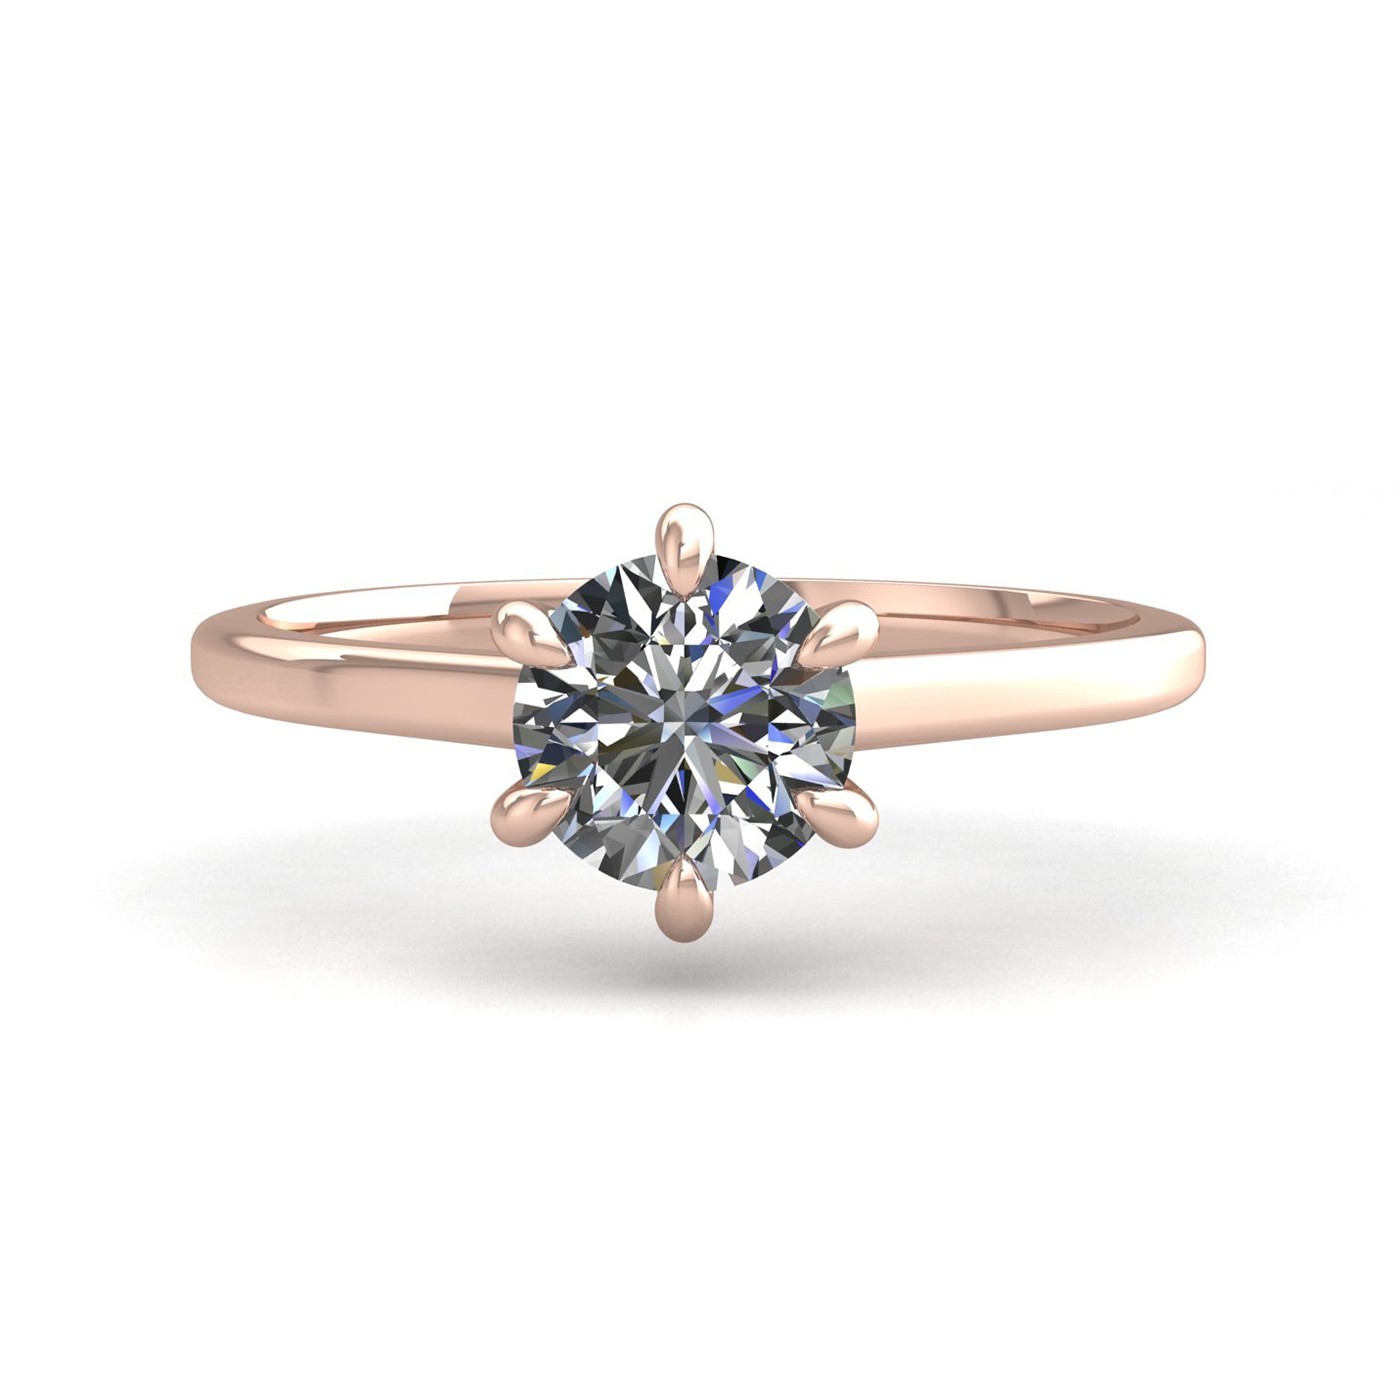 18k rose gold 2,50 ct 6 prongs solitaire round cut diamond engagement ring with whisper thin band Photos & images